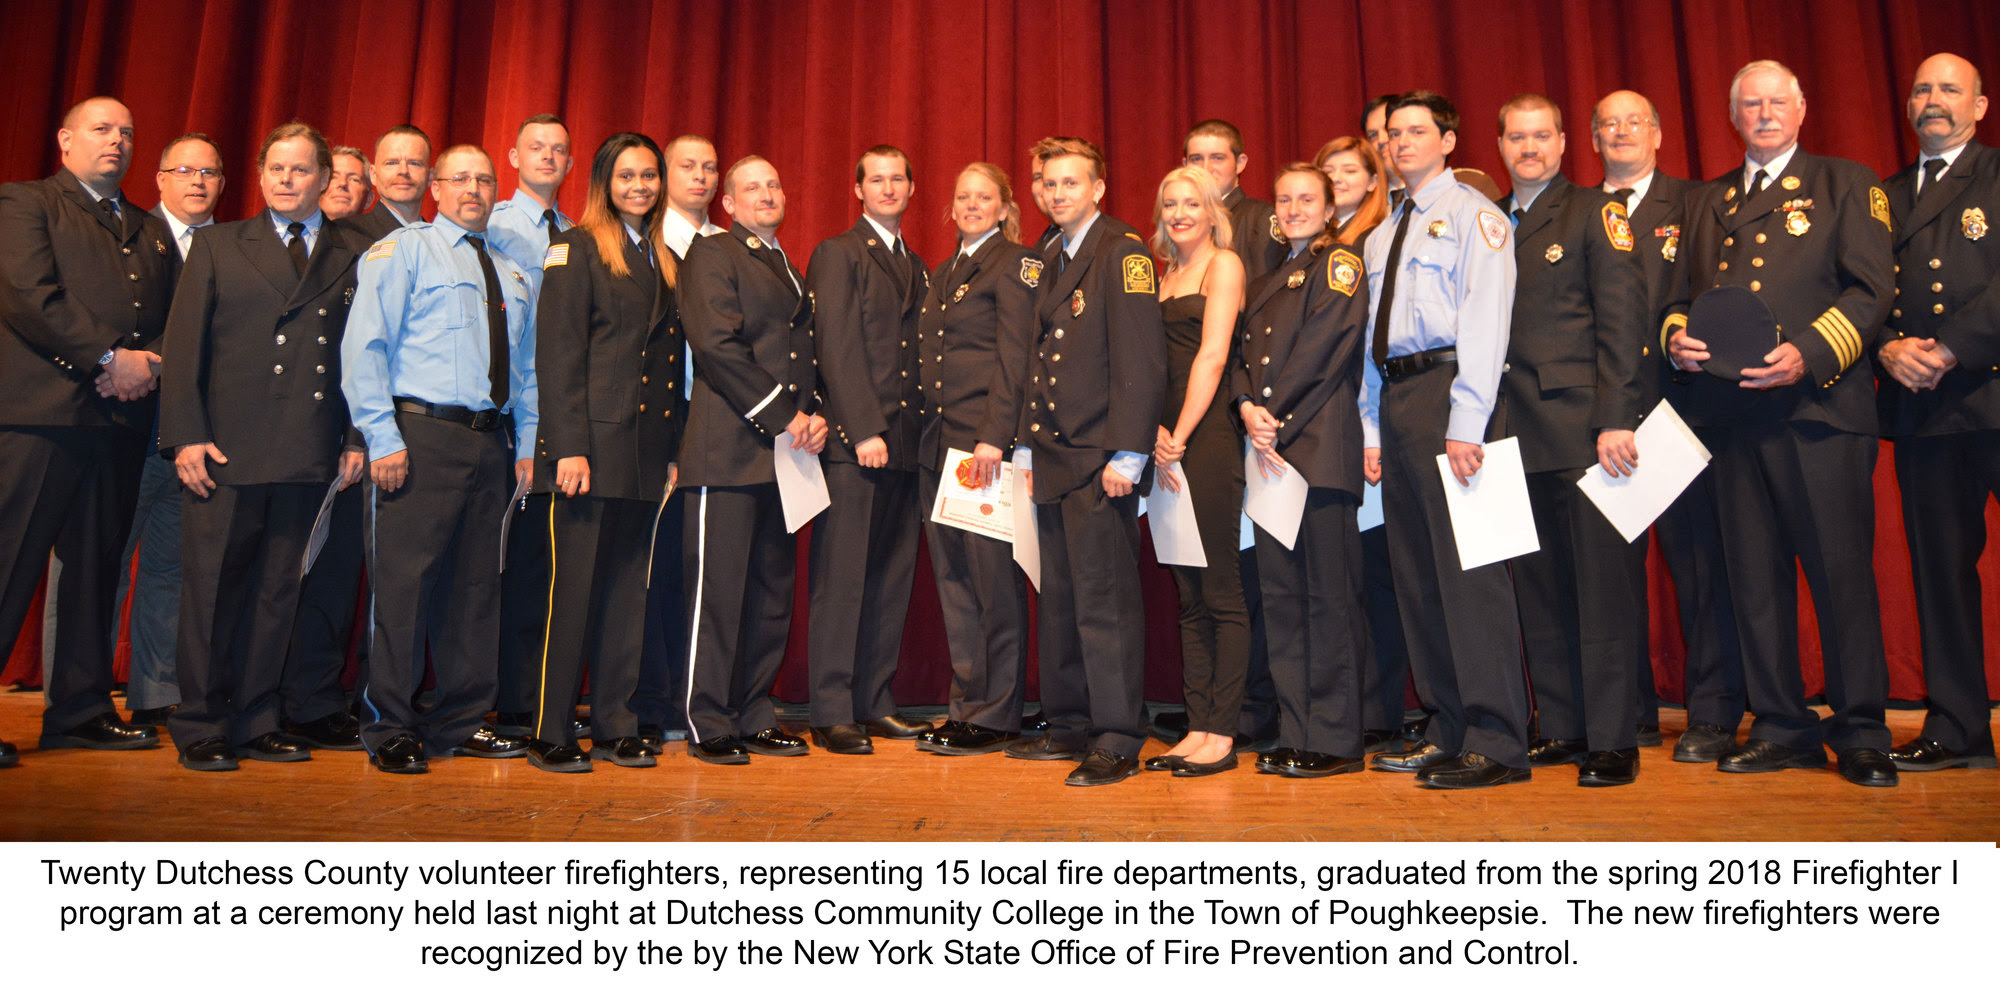 Twenty Dutchess County volunteer firefighters, representing 15 local fire departments, were recognized at a graduation ceremony.